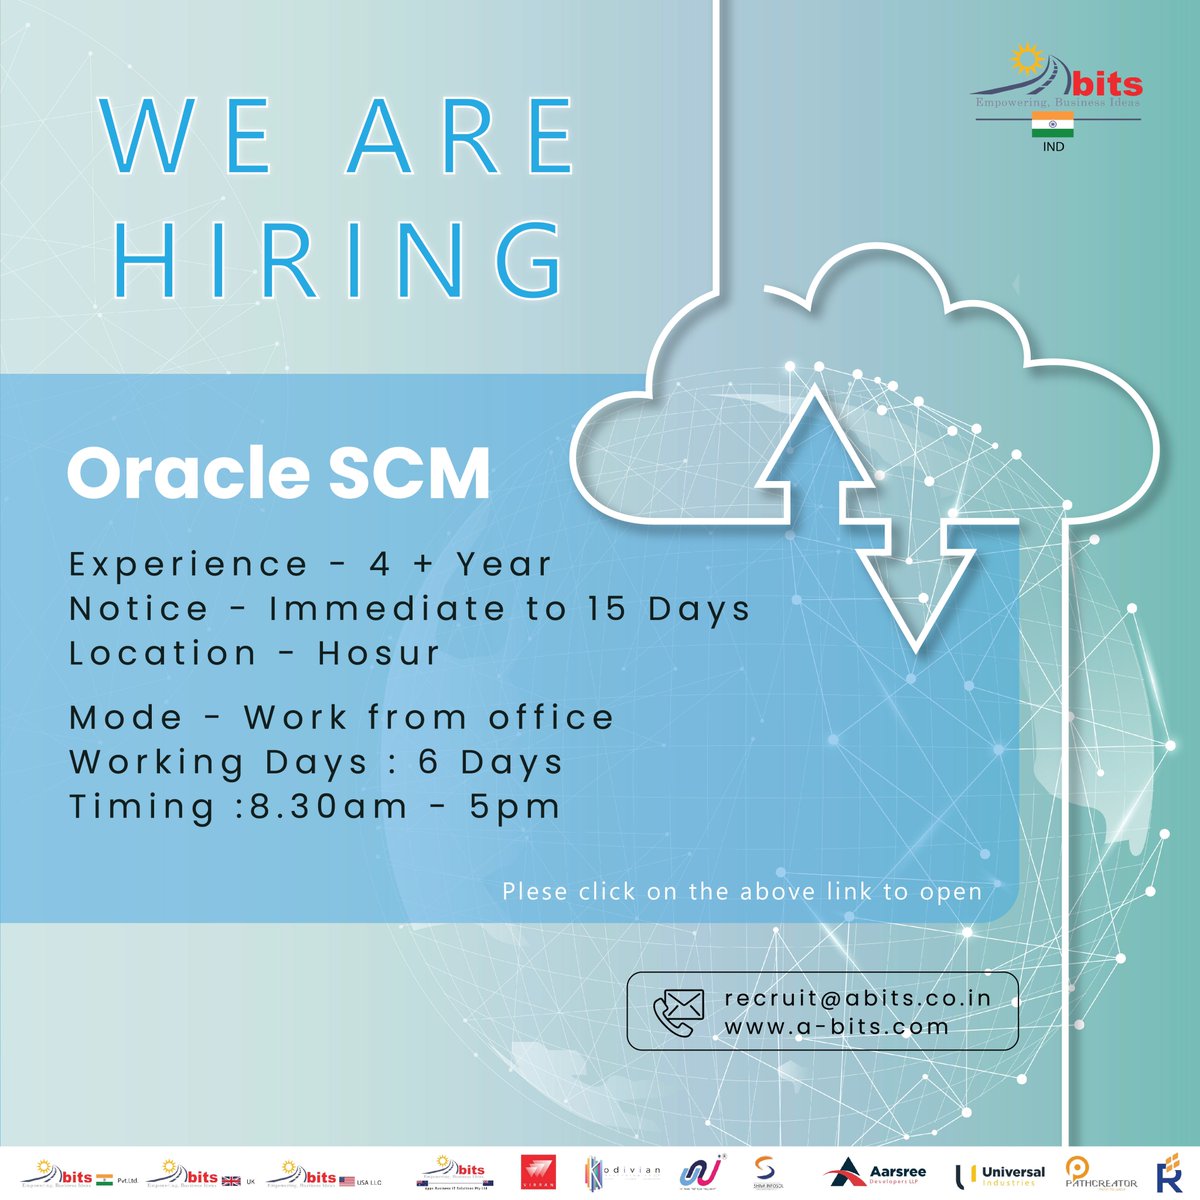 Oracle SCM

Experience - 4 + Years.
Notice - Immediate to 15 Days
Location - Hosur .
Mode - Work from office.
Working Days : 6 Days.
Timing :8.30am - 5pm.

#ssgroup #abits #recruiters #linkedinjobs #career #careergrowth #careerdevelopment #targetcareers #jobhiring #jobsearch